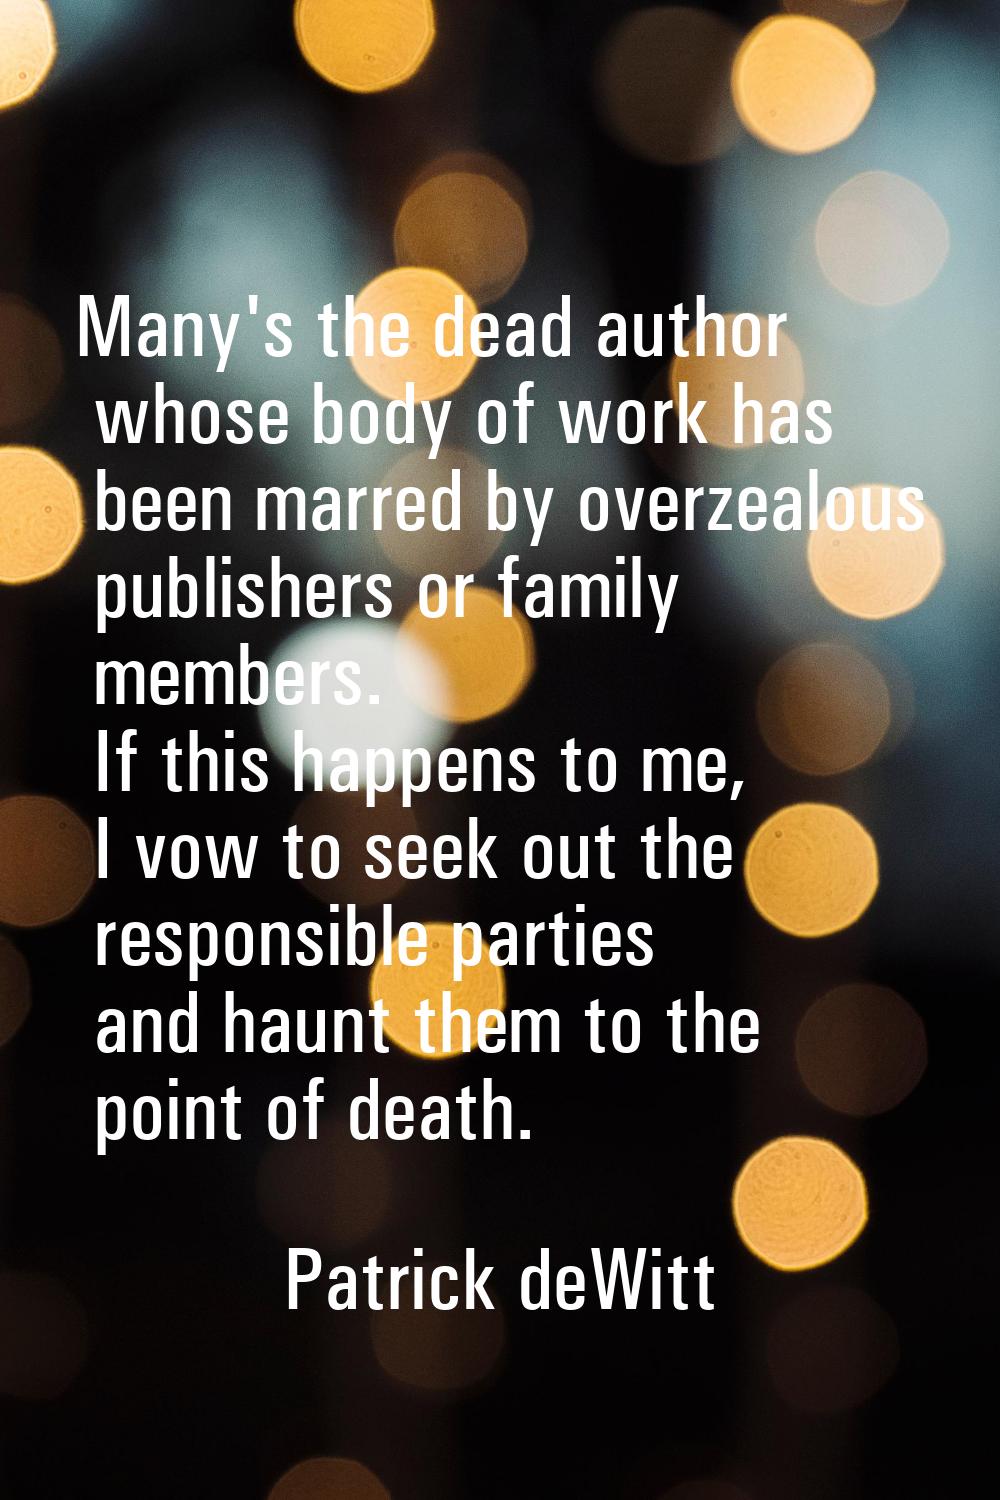 Many's the dead author whose body of work has been marred by overzealous publishers or family membe